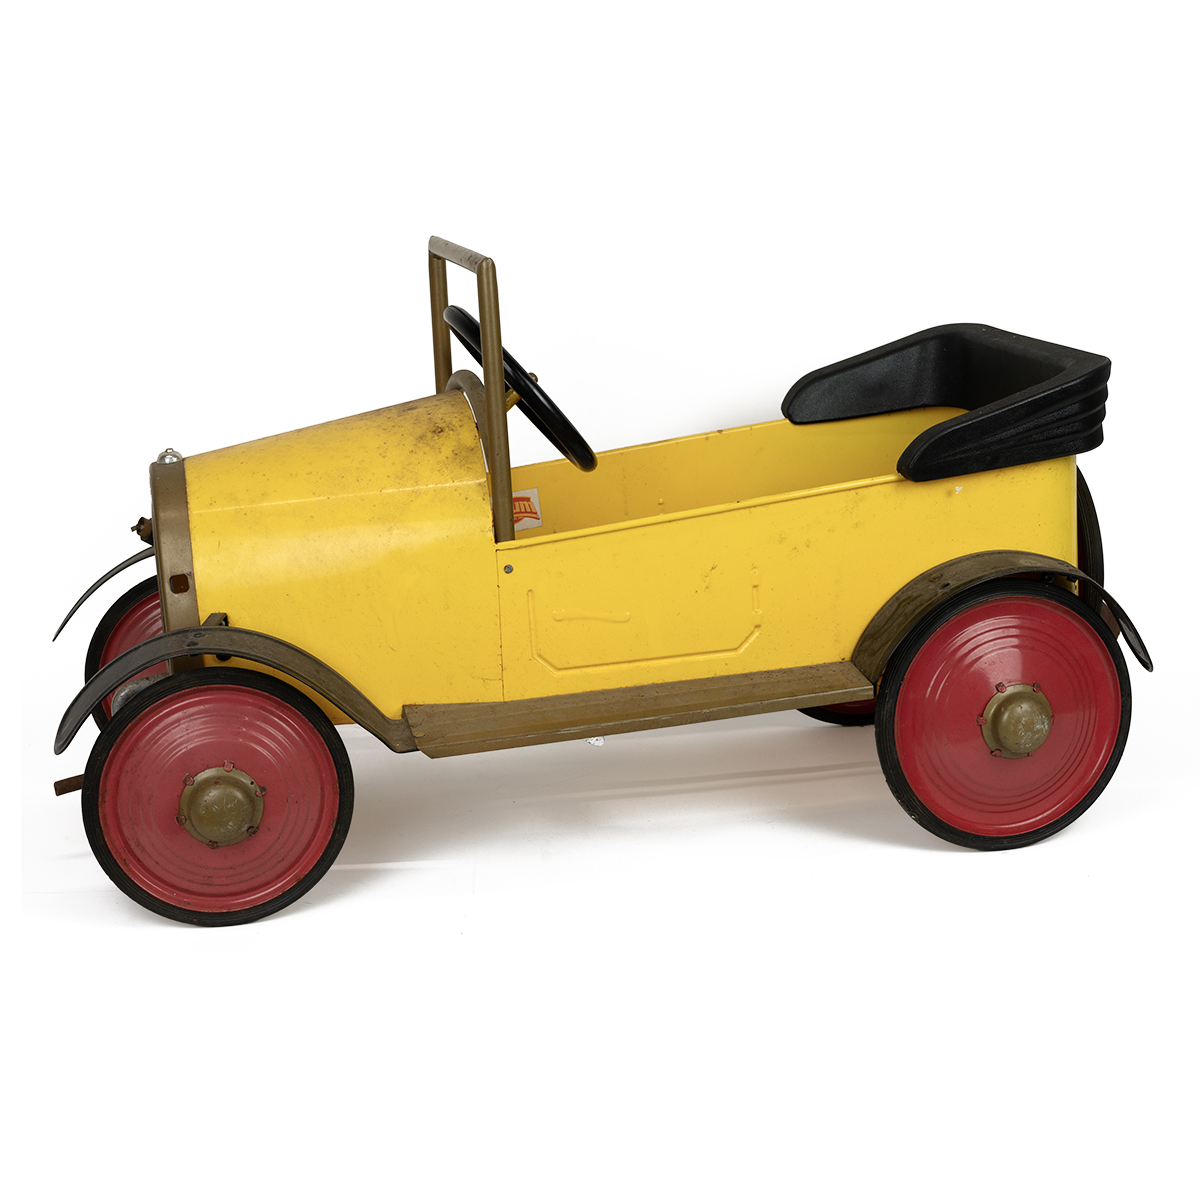 A vintage "Ragdoll Brum 2003" ride-on pedal car in yellow and red with pedals and crank handle, t... - Image 2 of 5